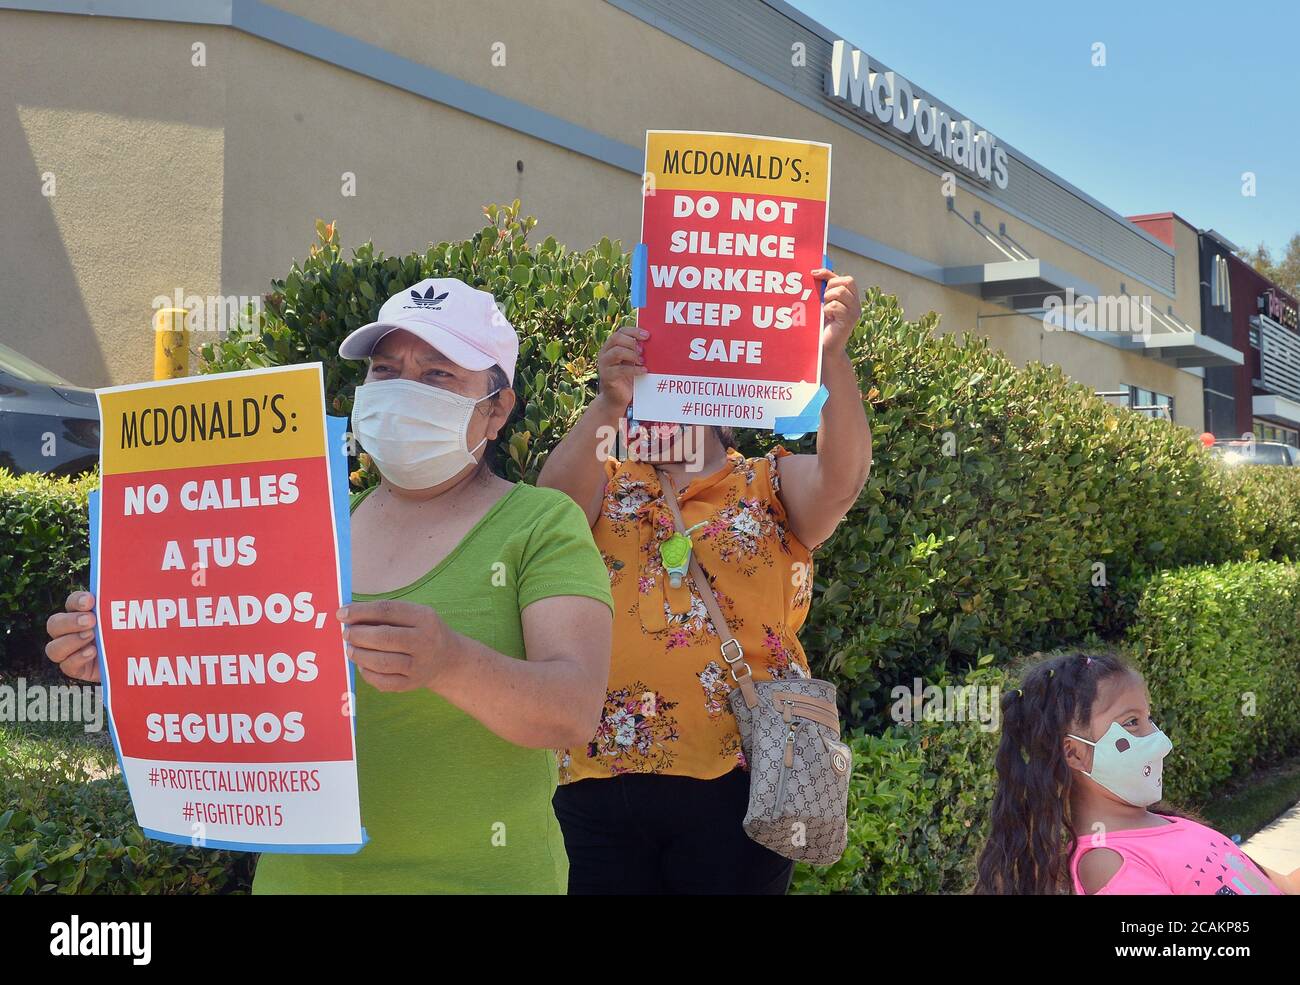 Women hold signs as McDonald's workers and their supporters protest what they allege is McDonald's attempts to silence a worker who spoke out about unsafe conditions amid the COVID-19 pandemic outside a McDonald's in Los Angeles on Friday, August 7, 2020. According to the protestors, the worker, Lizett Aguilar had filed multiple complaints with the county health department alleging an array of violations in her workplace including customers being served without masks, a lack of proper PPE and insufficient social distancing. At least five employees at the Marengo Street McDonald's where Aguilar Stock Photo